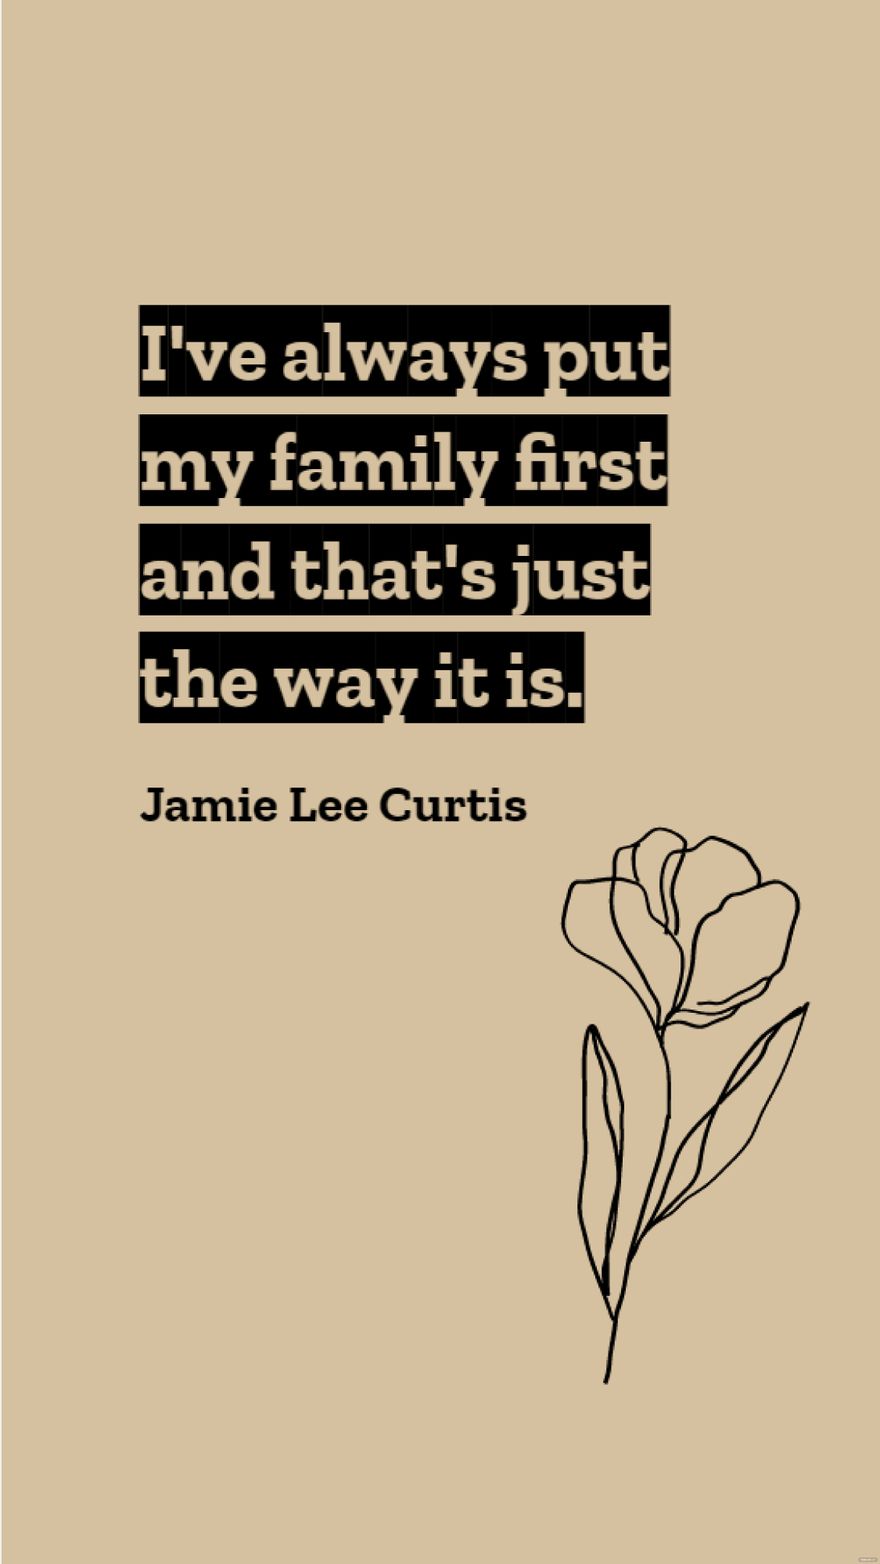 Jamie Lee Curtis - I've always put my family first and that's just the way it is.